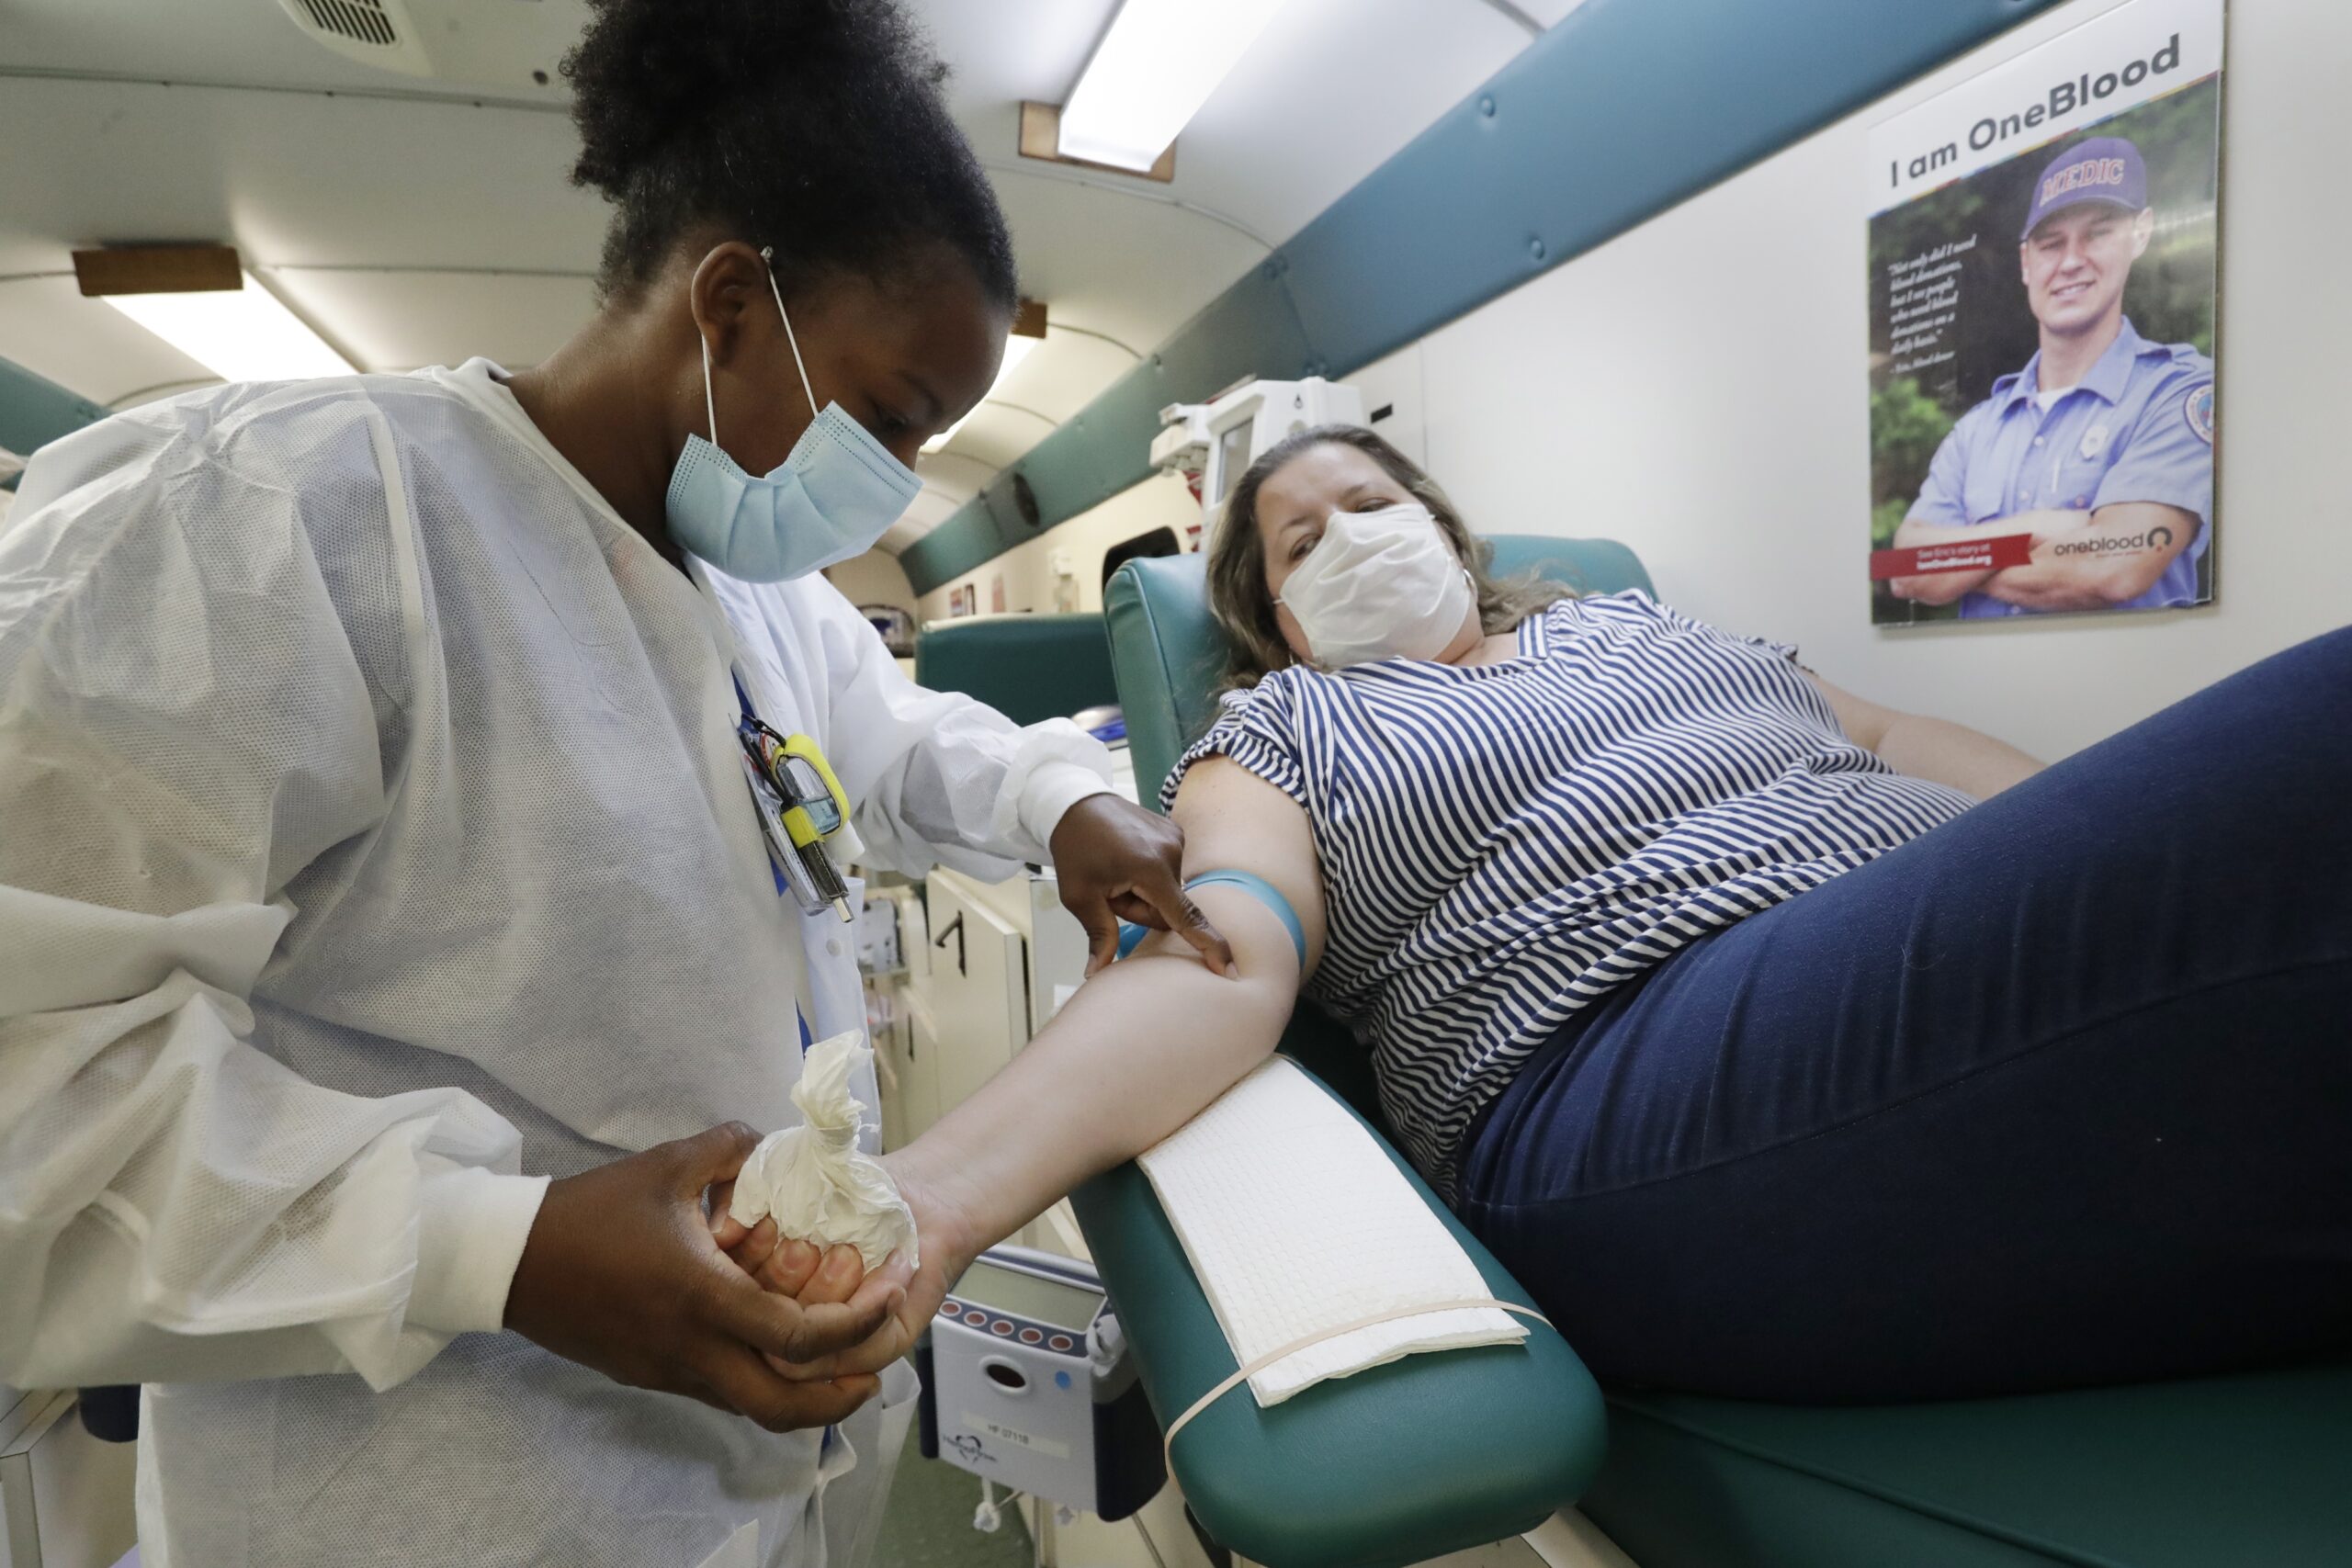 Phlebotomist Josianne Fiefie looks for a vein as Maria Teresa Andreychuk prepares to donate blood